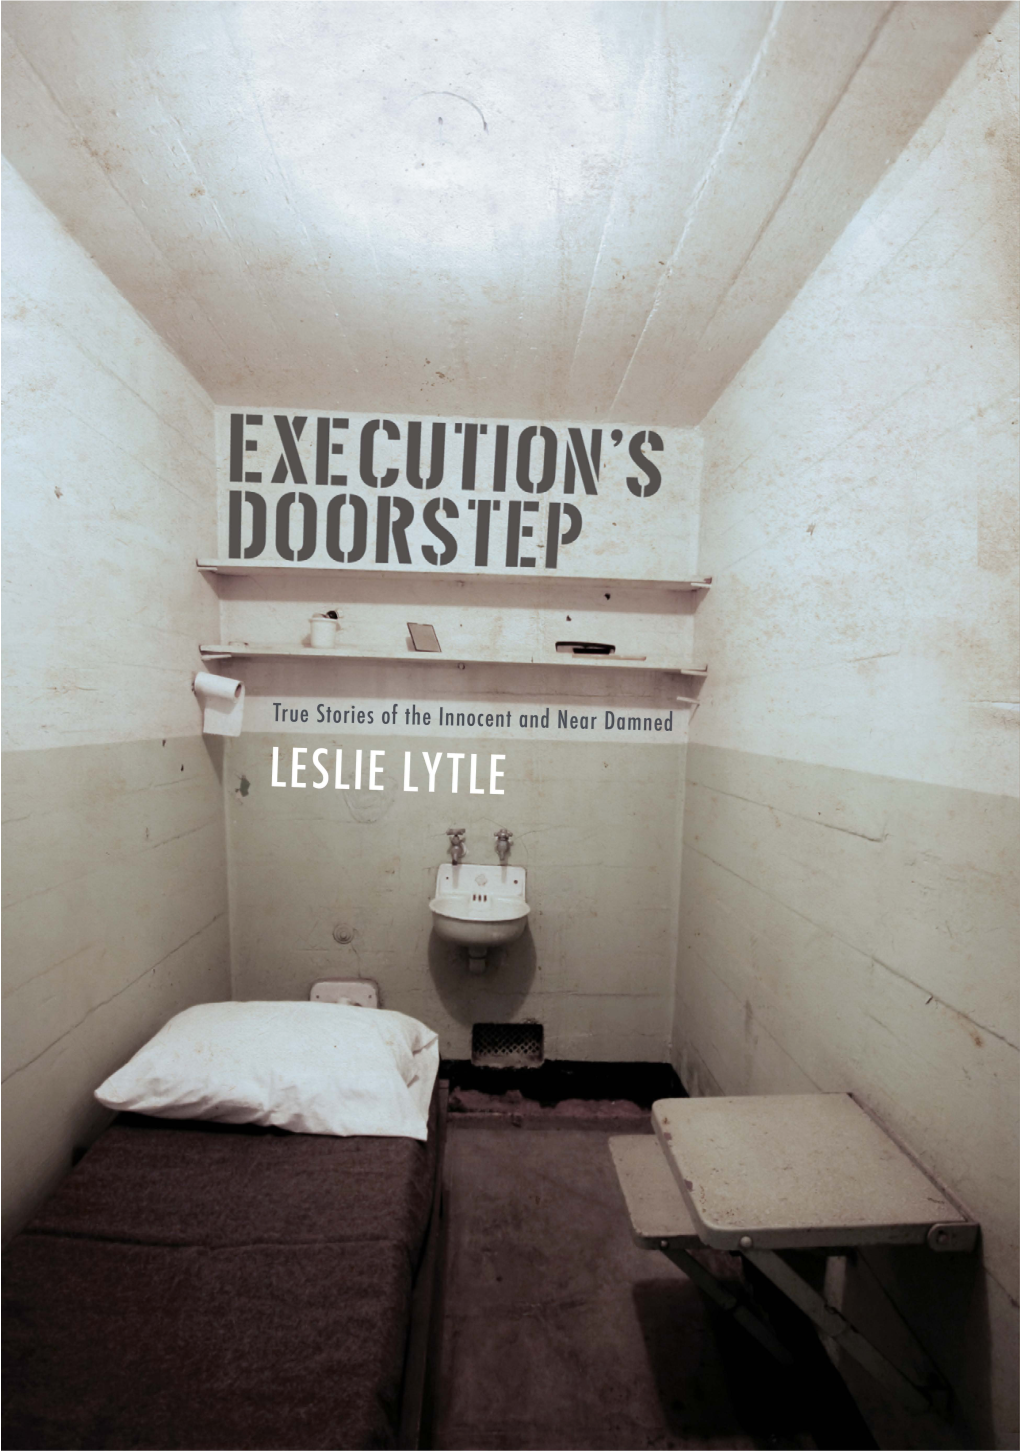 Execution's Doorstep: True Stories of the Innocent and Near Damned